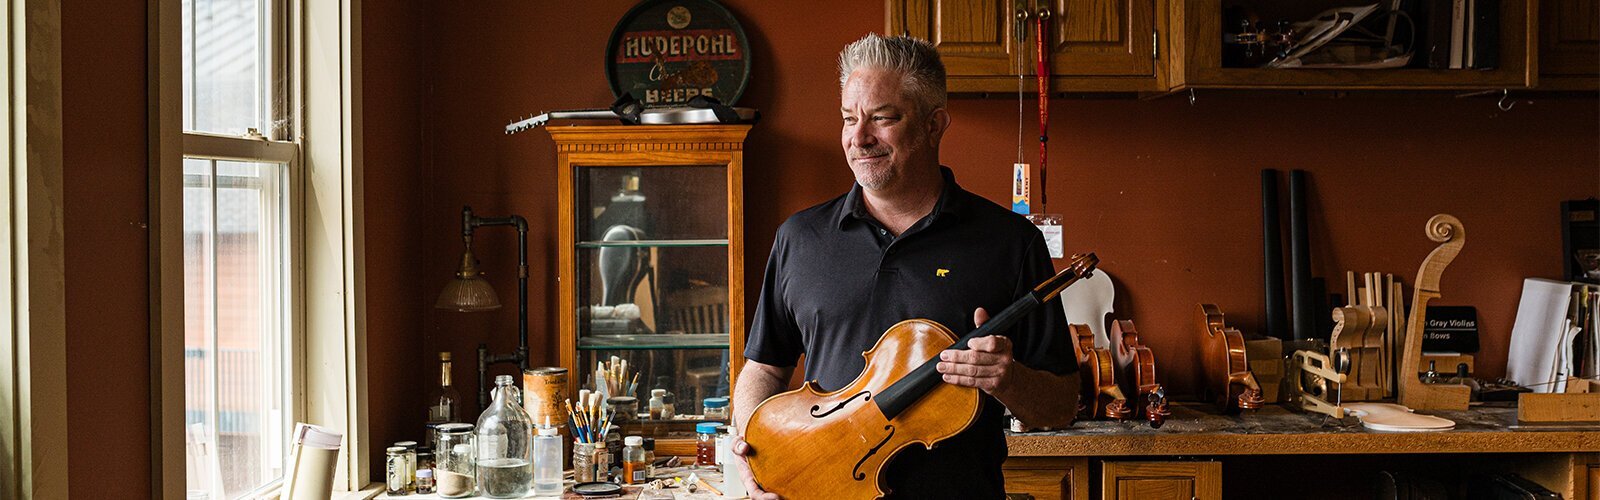 Damon Gray builds violins, violas, and cellos from his home workshop in Prospect Hill.